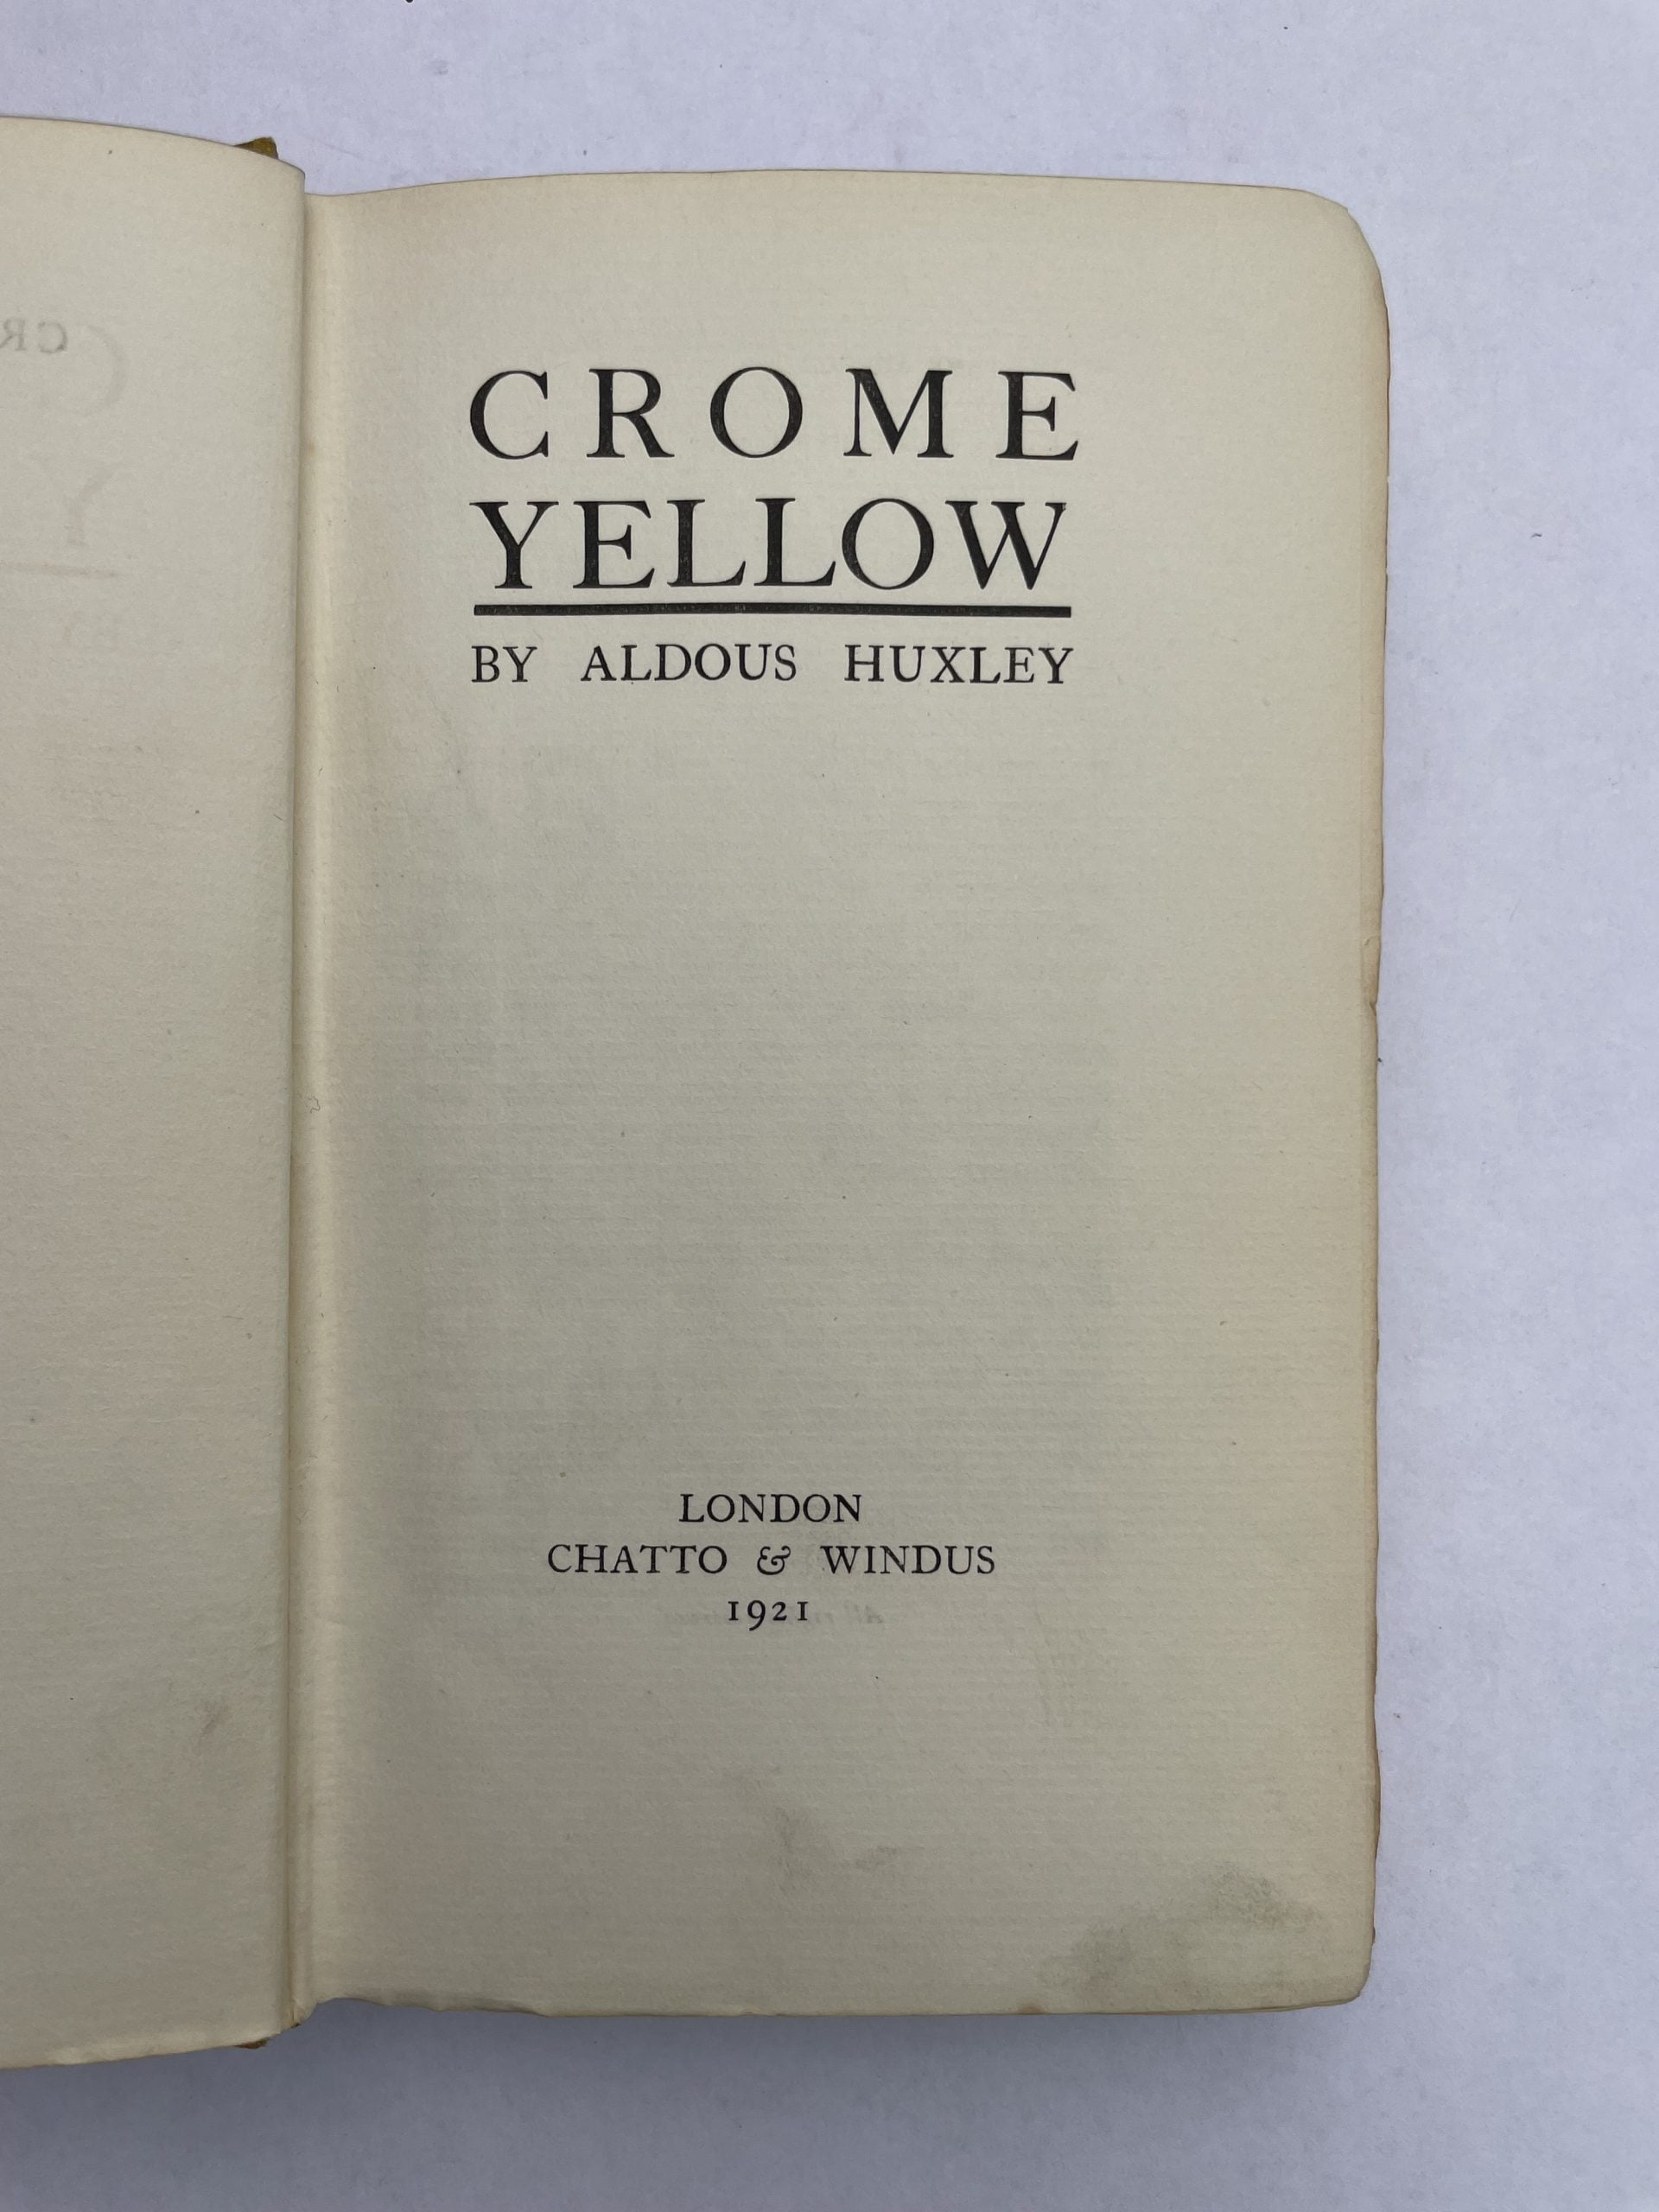 aldous huxley crome yellow first2